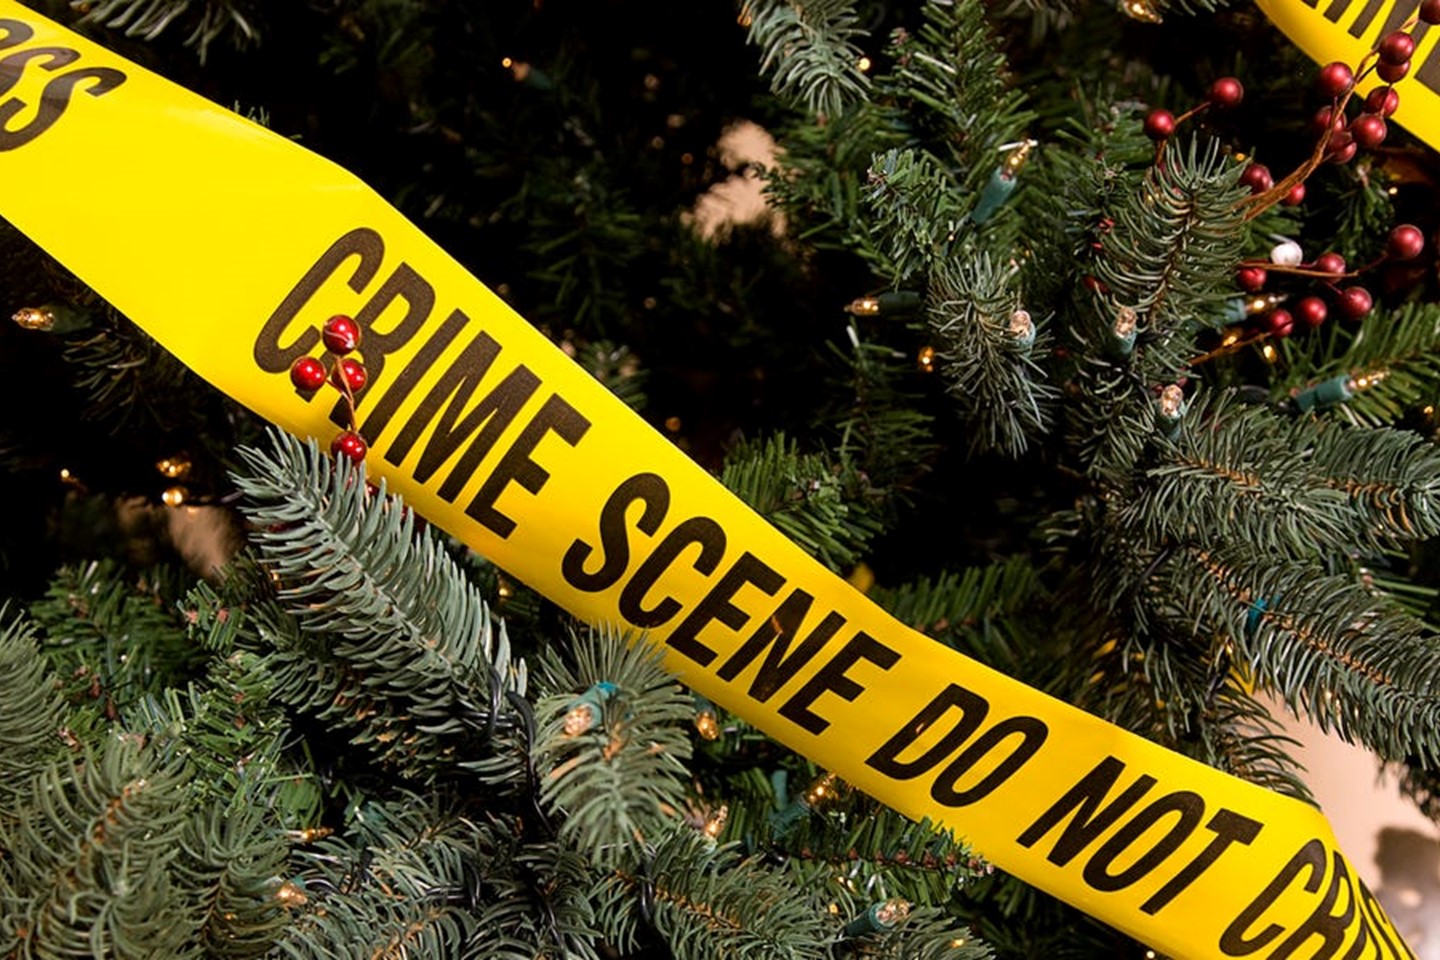 'Crime scene do not cross' sign draped across a christmas tree, with red berries 